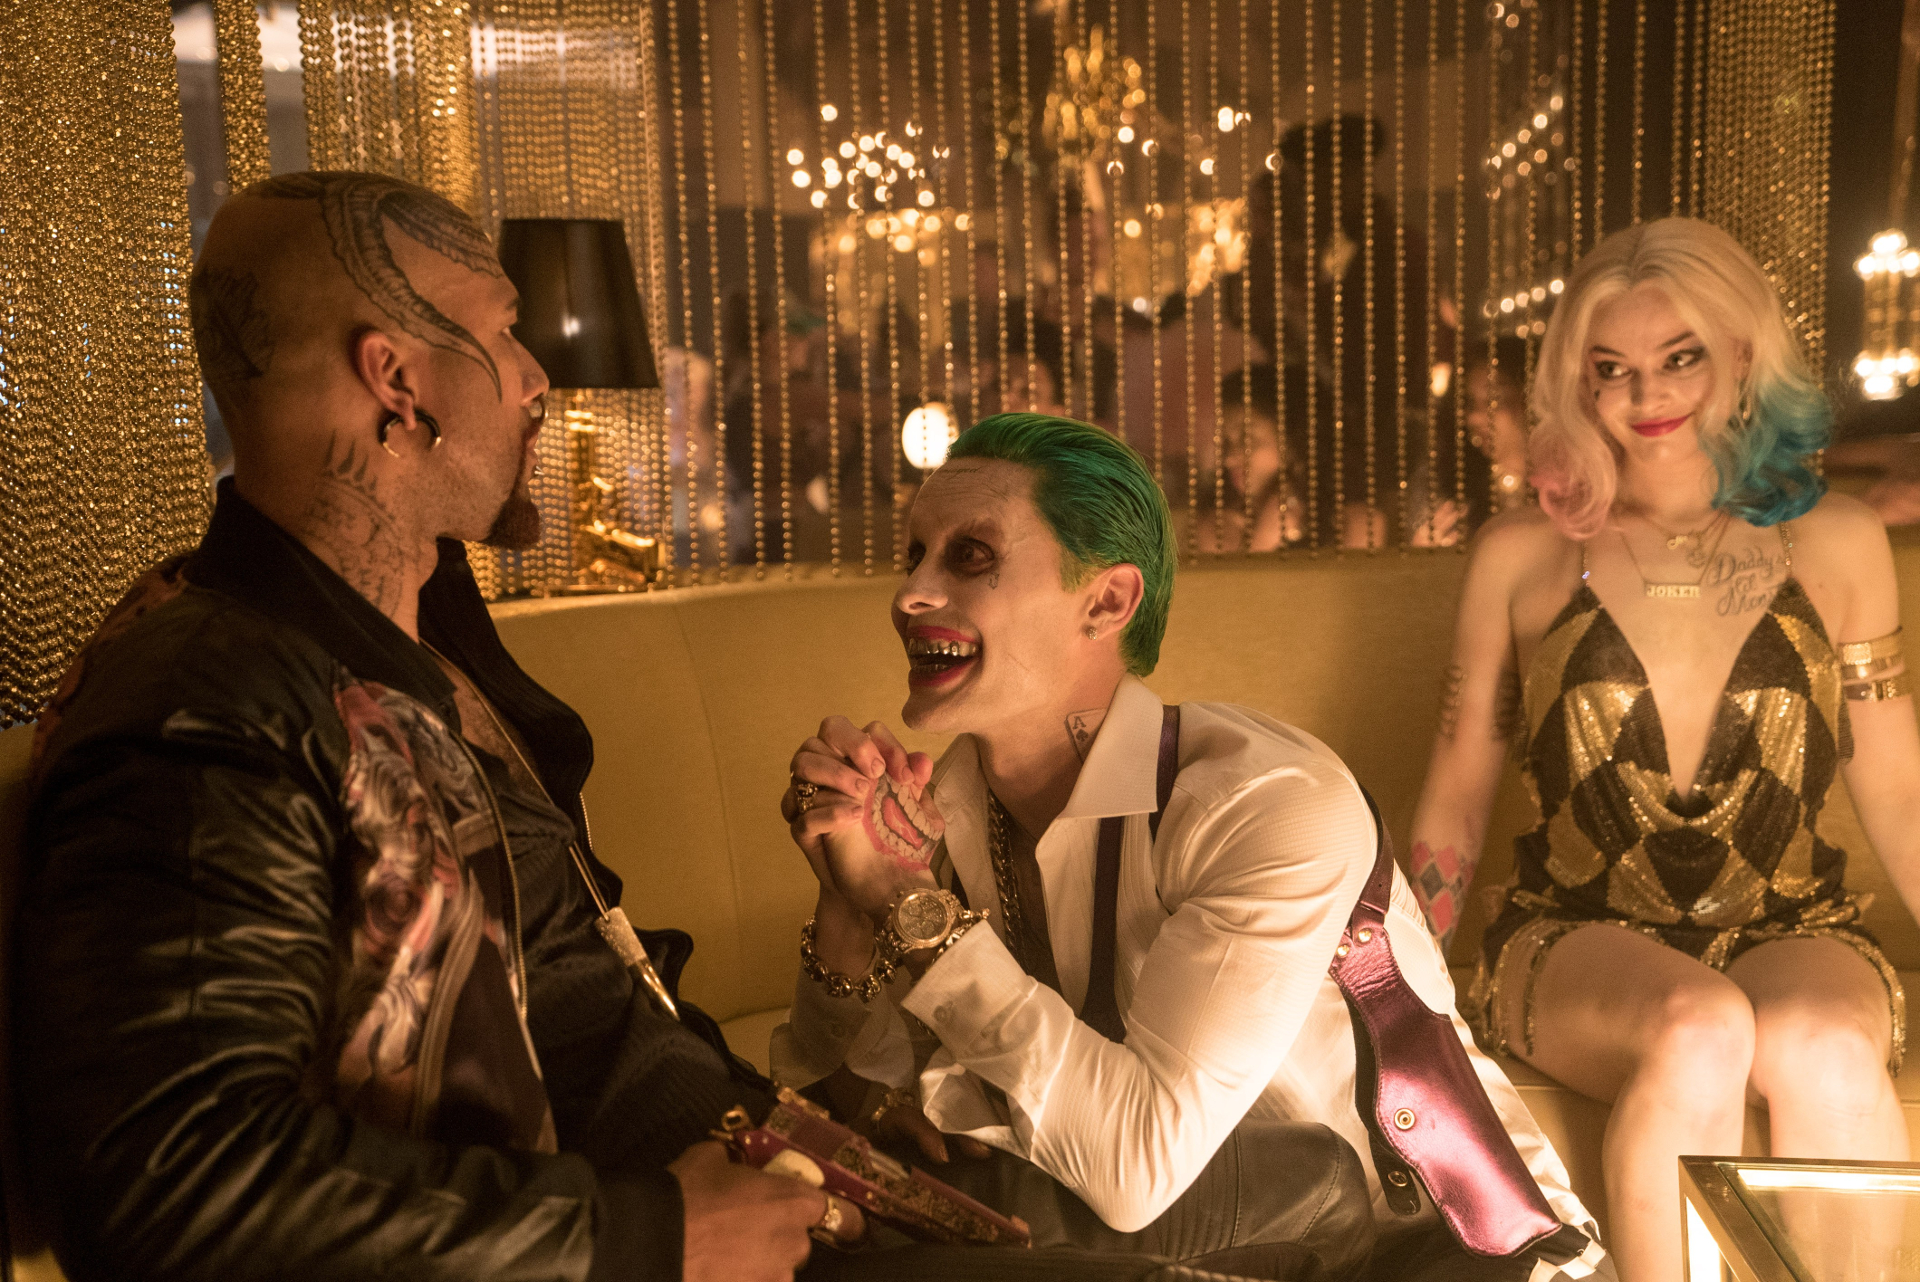 android harley quinn, joker, movie, suicide squad, dc comics, deadshot, jared leto, margot robbie, will smith